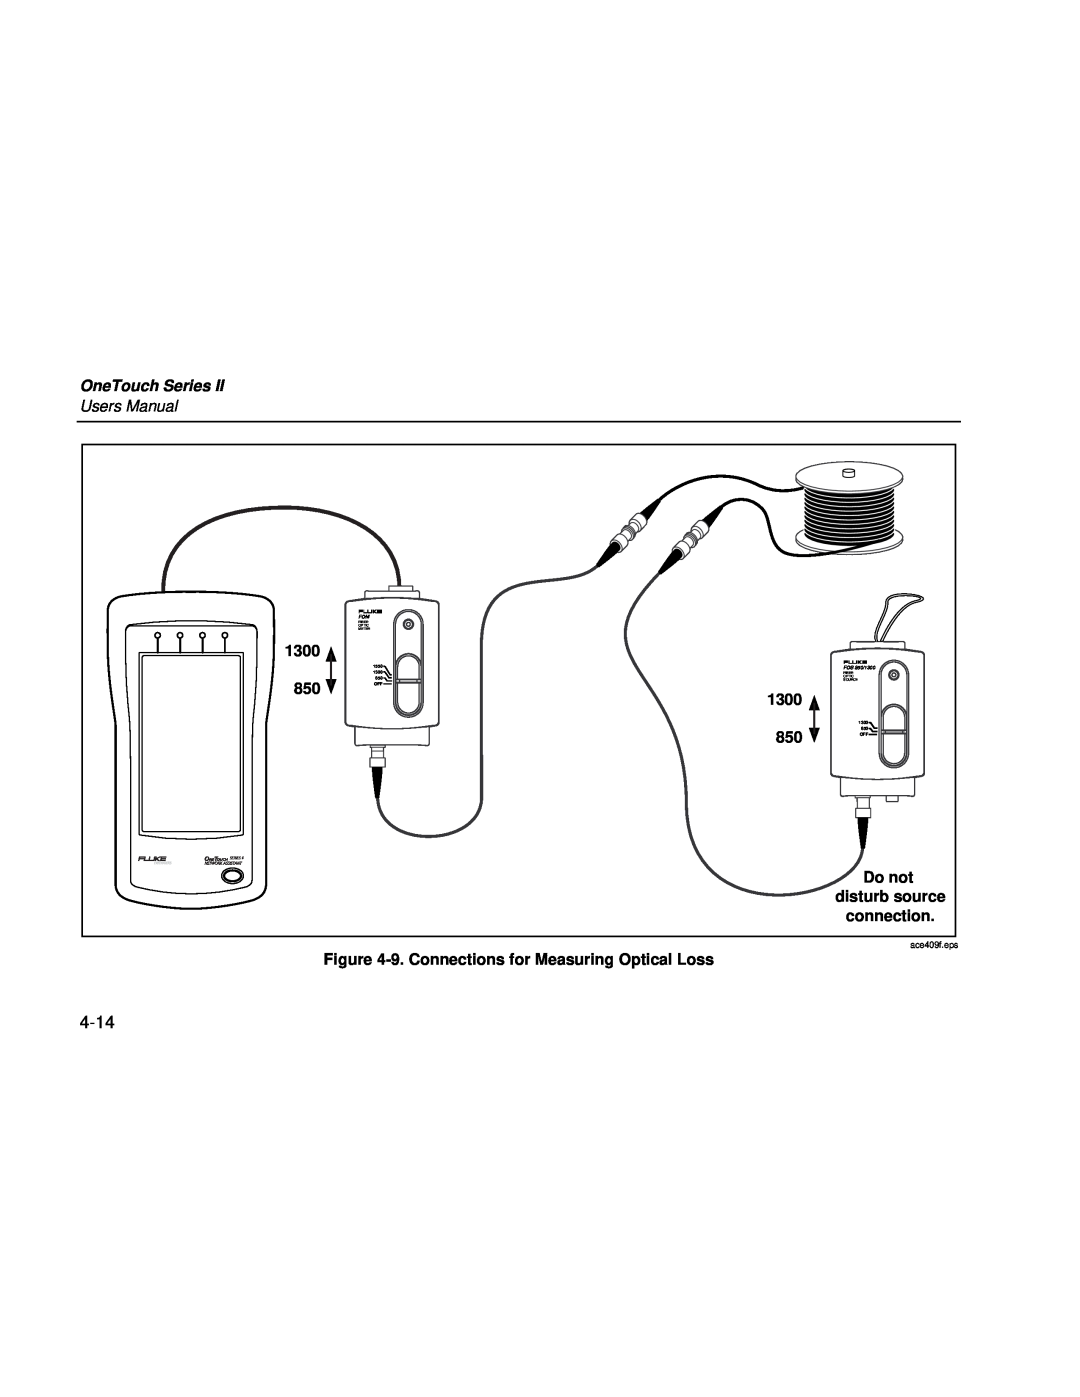 Fluke Series II 4-14, OneTouch Series, Users Manual, 1300 850, OFF Do not disturb source connection, ace409f.eps, Fiber 